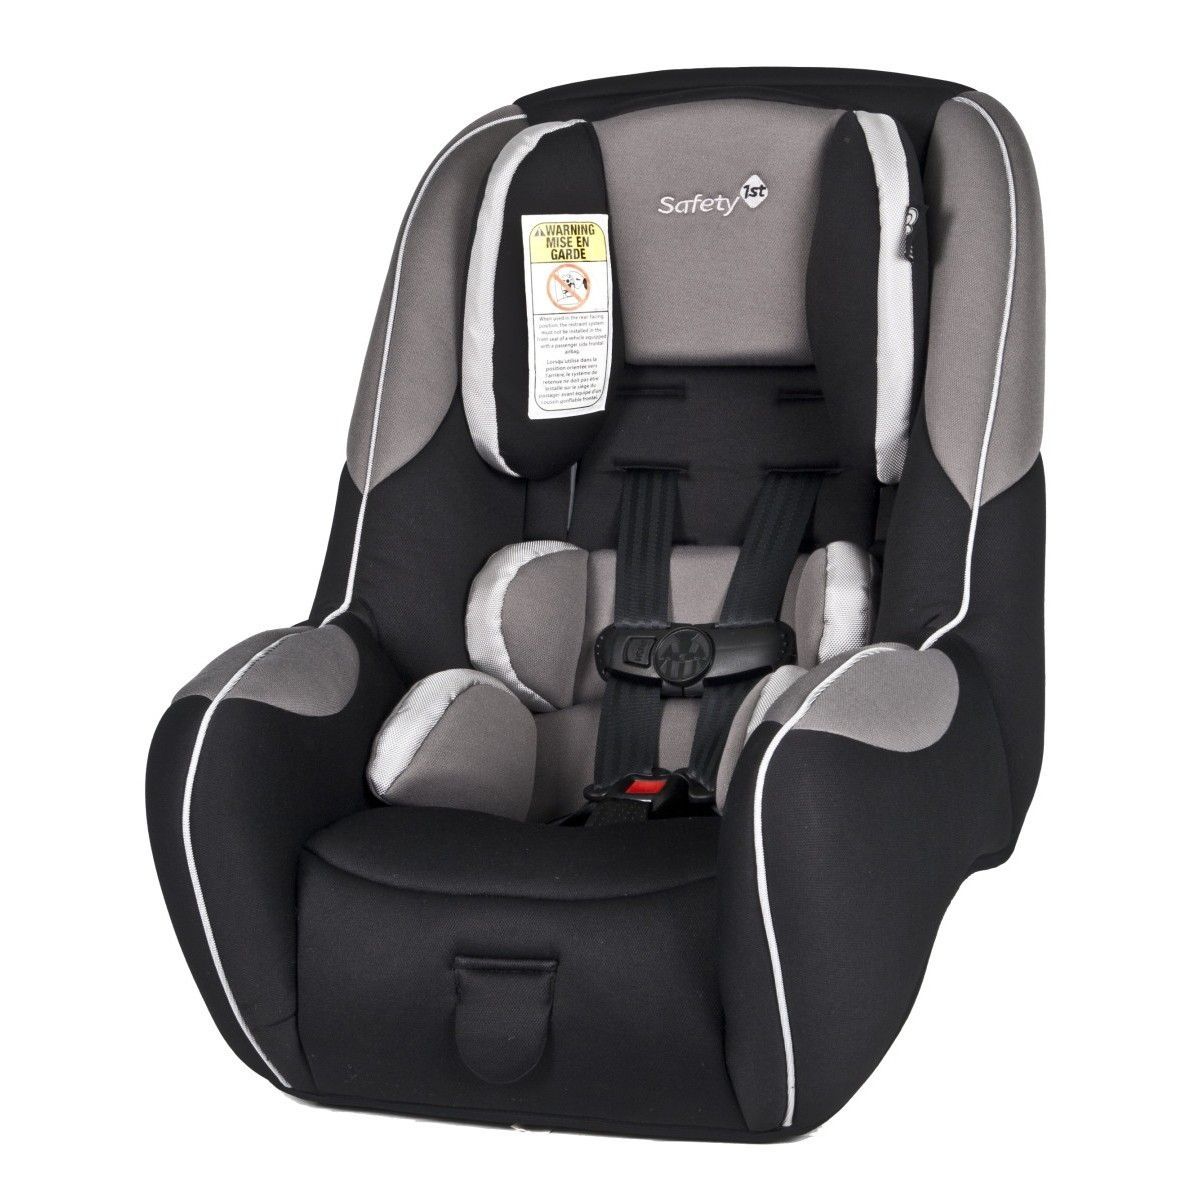 Safety 1St Guide 65 Convertible Car Seat - Top Shot - Convertible  throughout Safety 1St Guide 65 Spo… | Convertible car seat, Car seats, Convertible  car seat safety